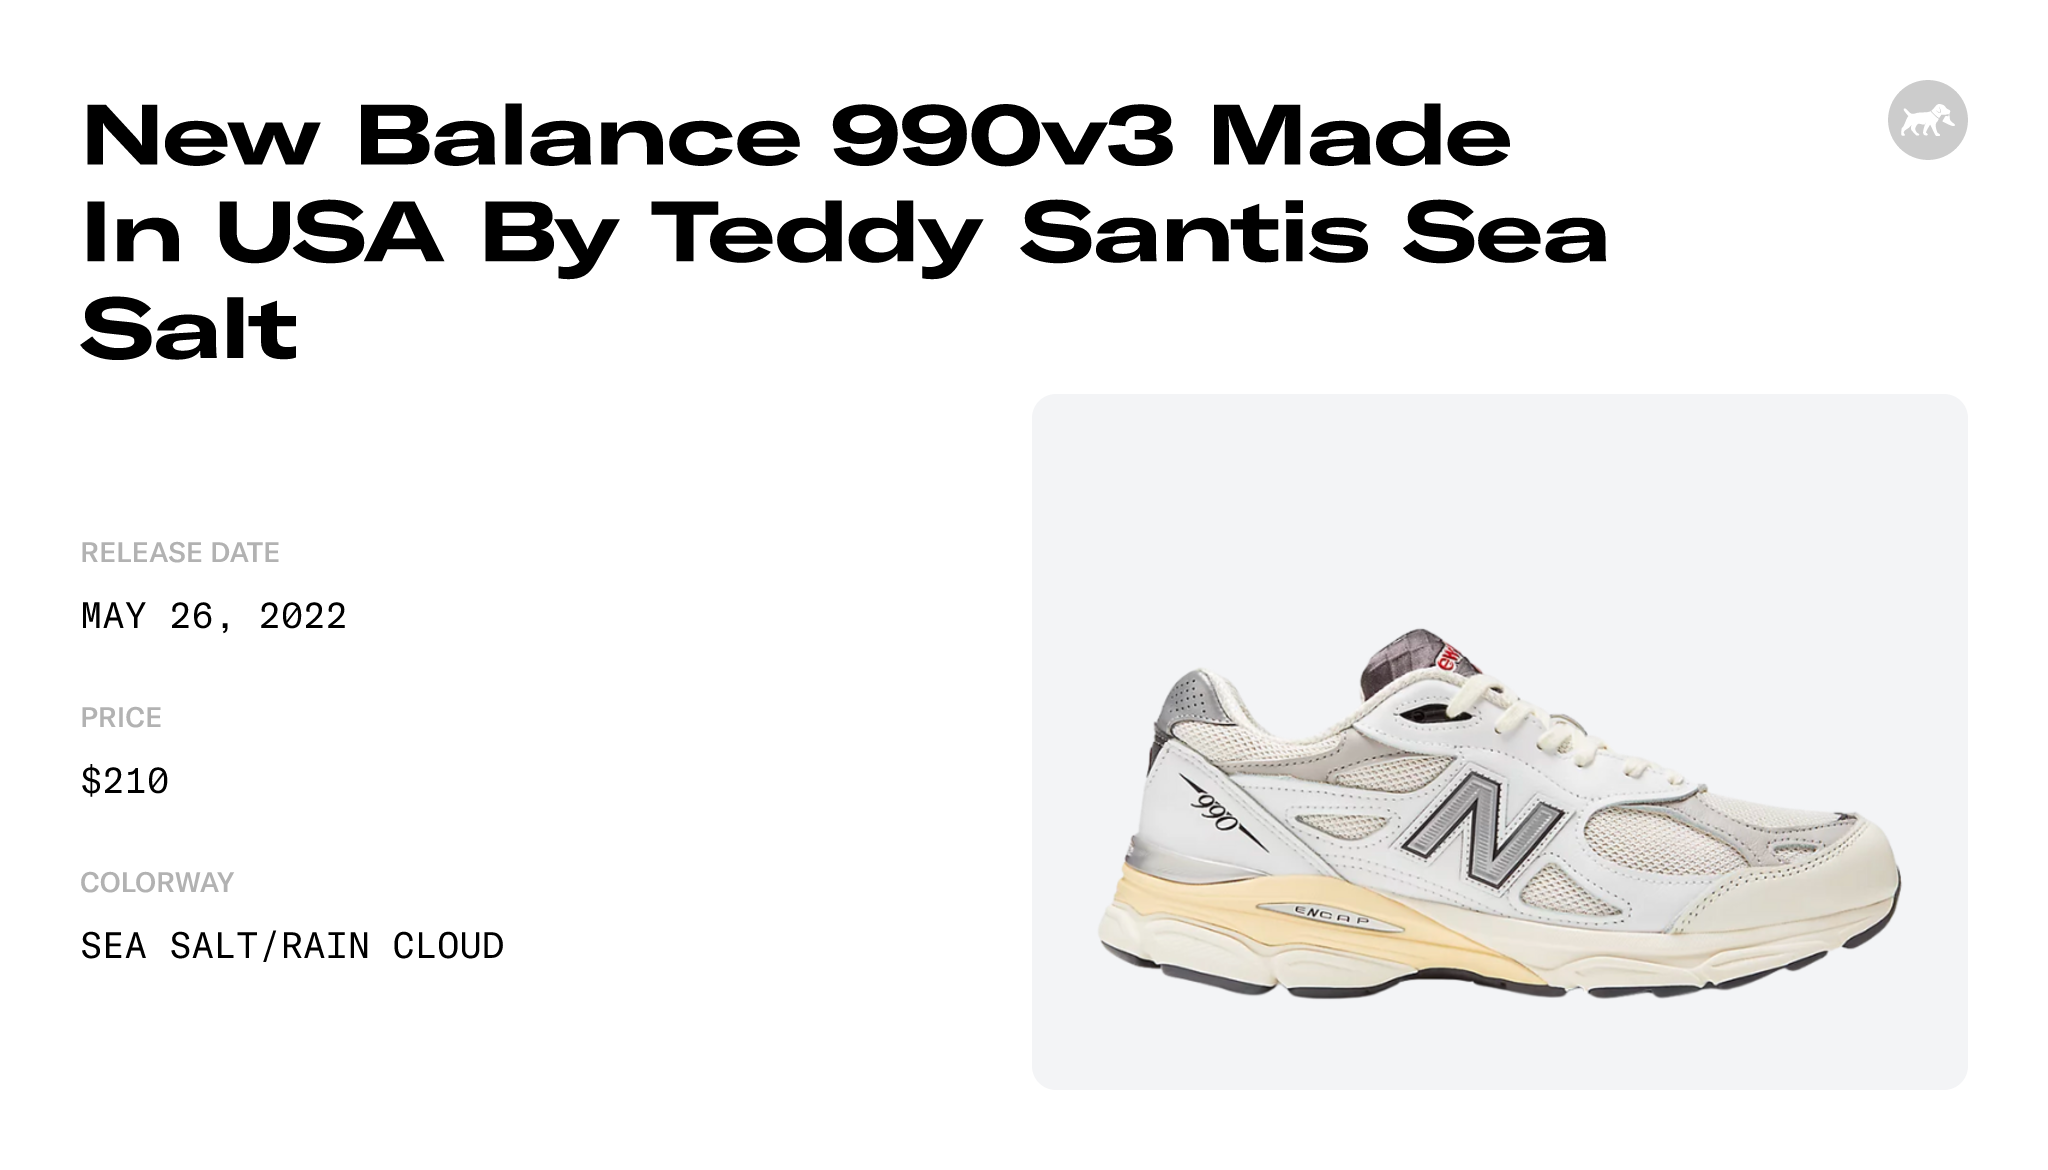 New Balance 990v3 Made In USA By Teddy Santis Sea Salt - M990AL3 Raffles  and Release Date